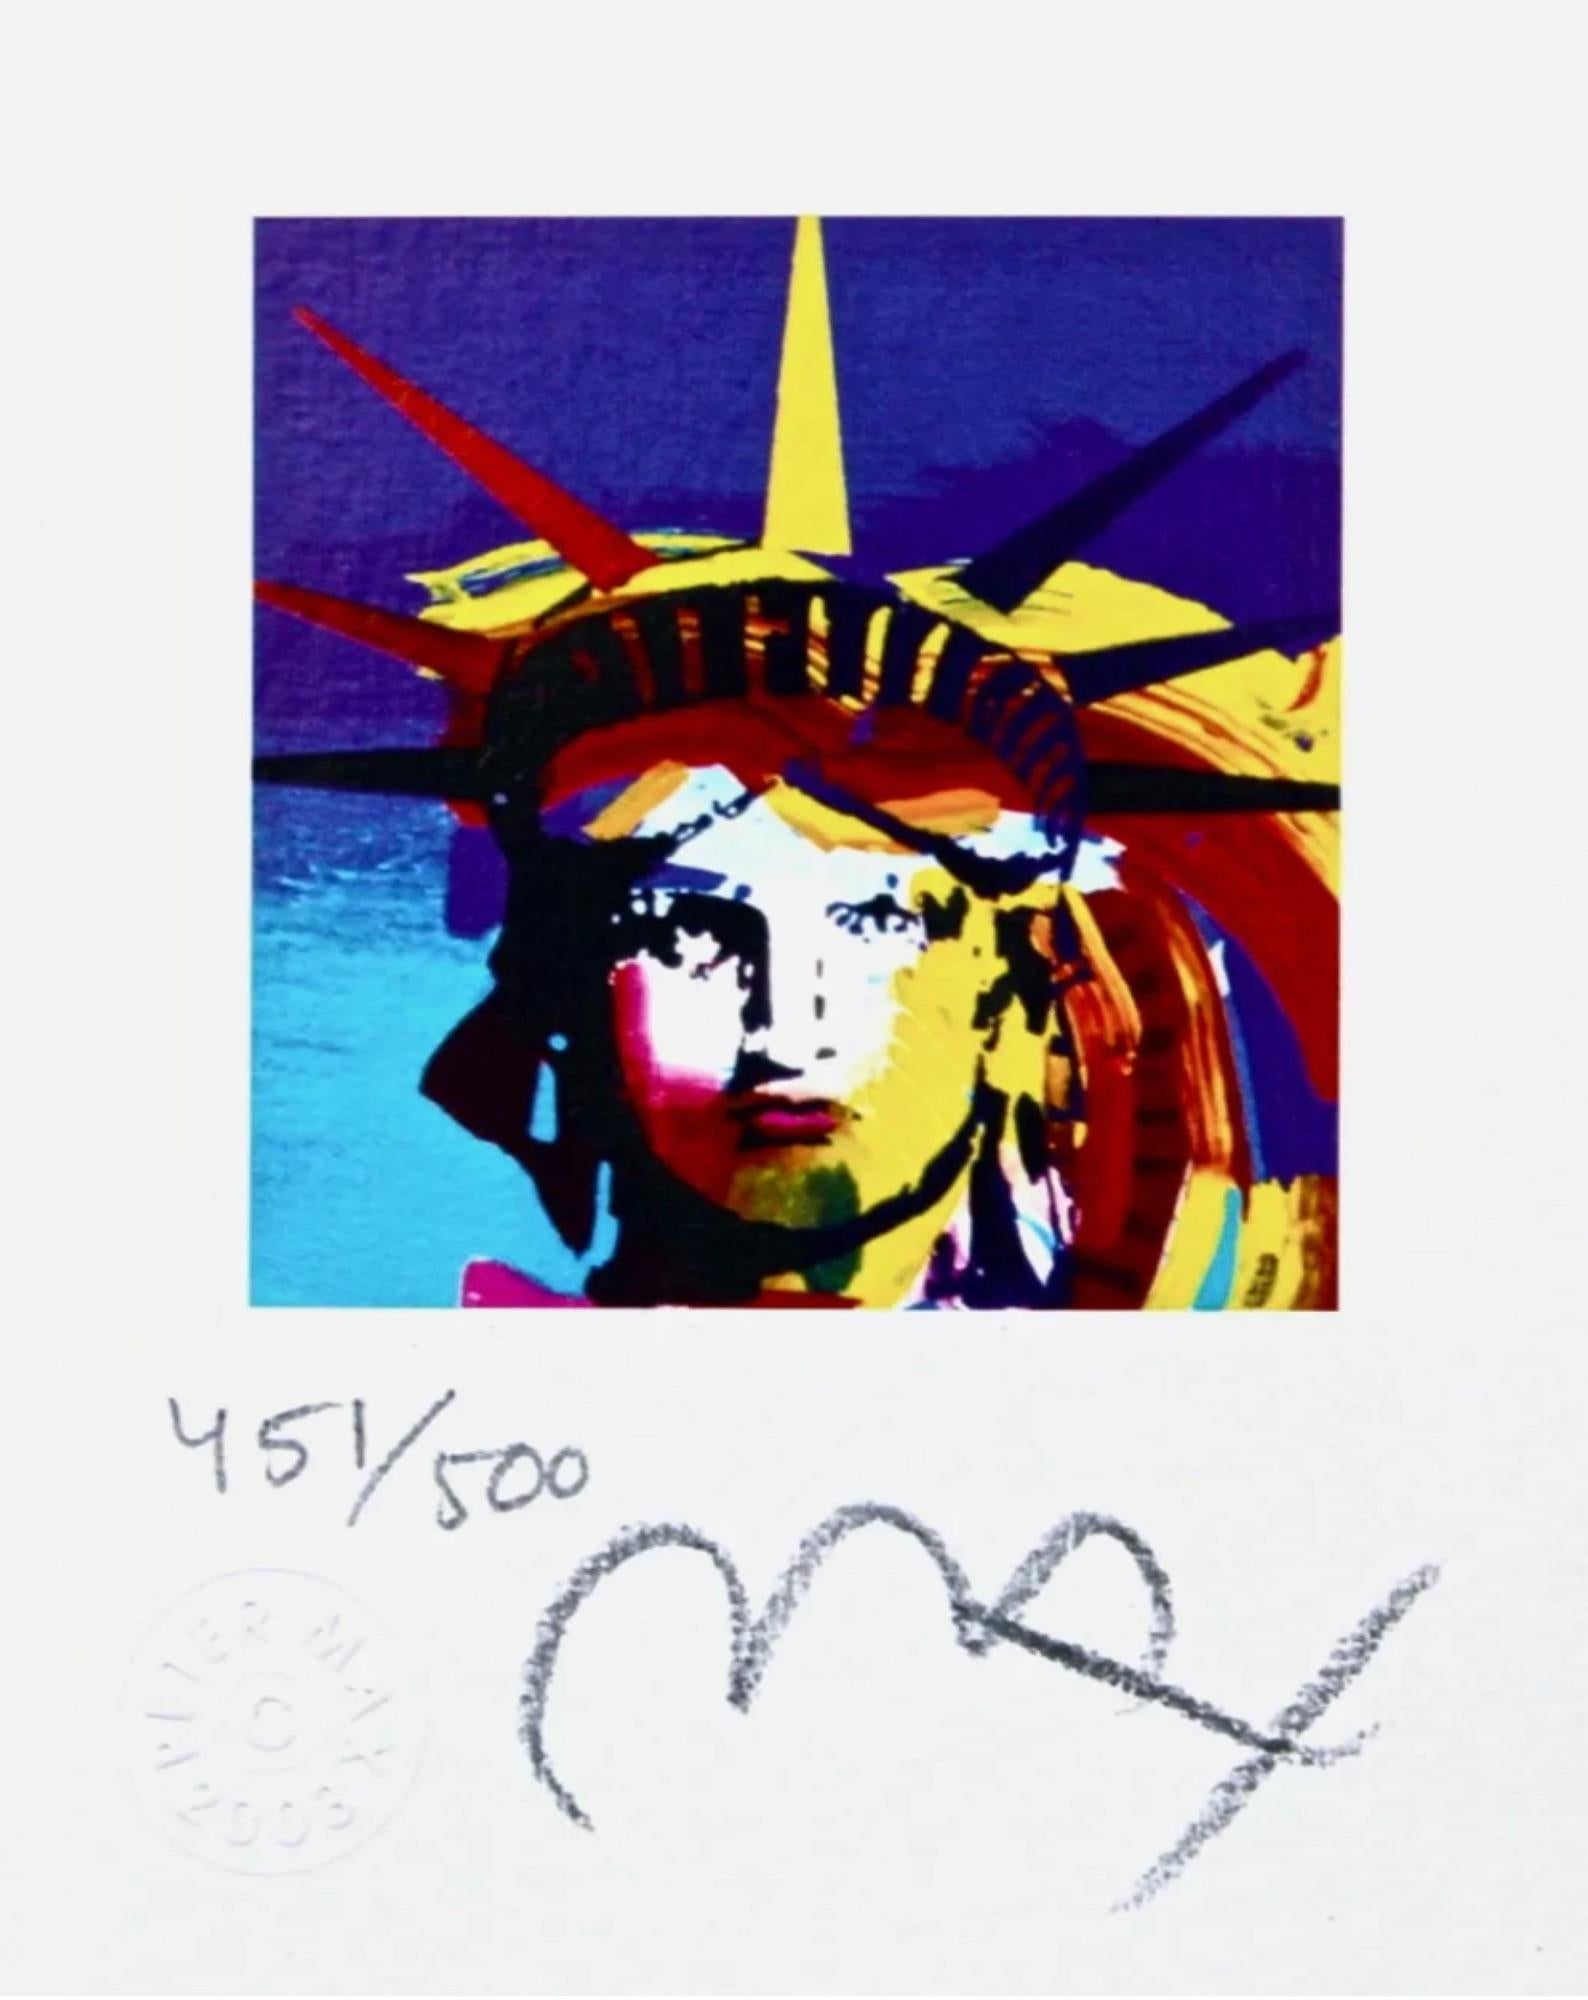 Artist: Peter Max (1937)
Title: Liberty Head VII
Year: 2003
Edition: 500, plus proofs
Medium: Lithograph on Lustro Saxony paper
Size: 3.43 x 2.62 inches
Condition: Excellent
Inscription: Signed and numbered by the artist.
Notes: Published by Via